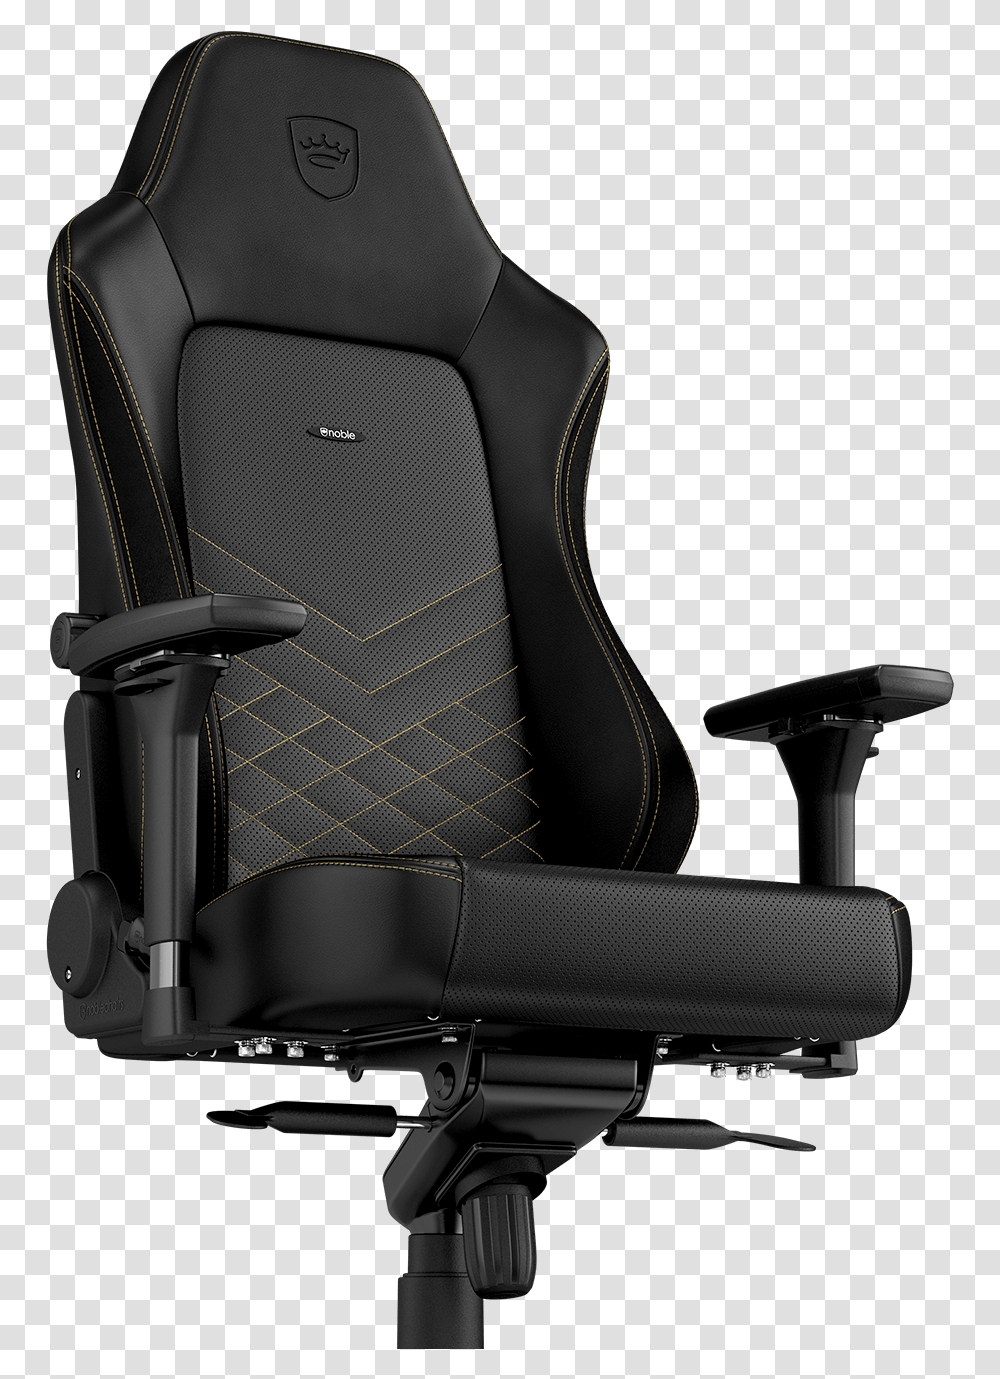 Hero Series Noblechairs Hero Real Leather, Furniture, Cushion, Armchair, Headrest Transparent Png